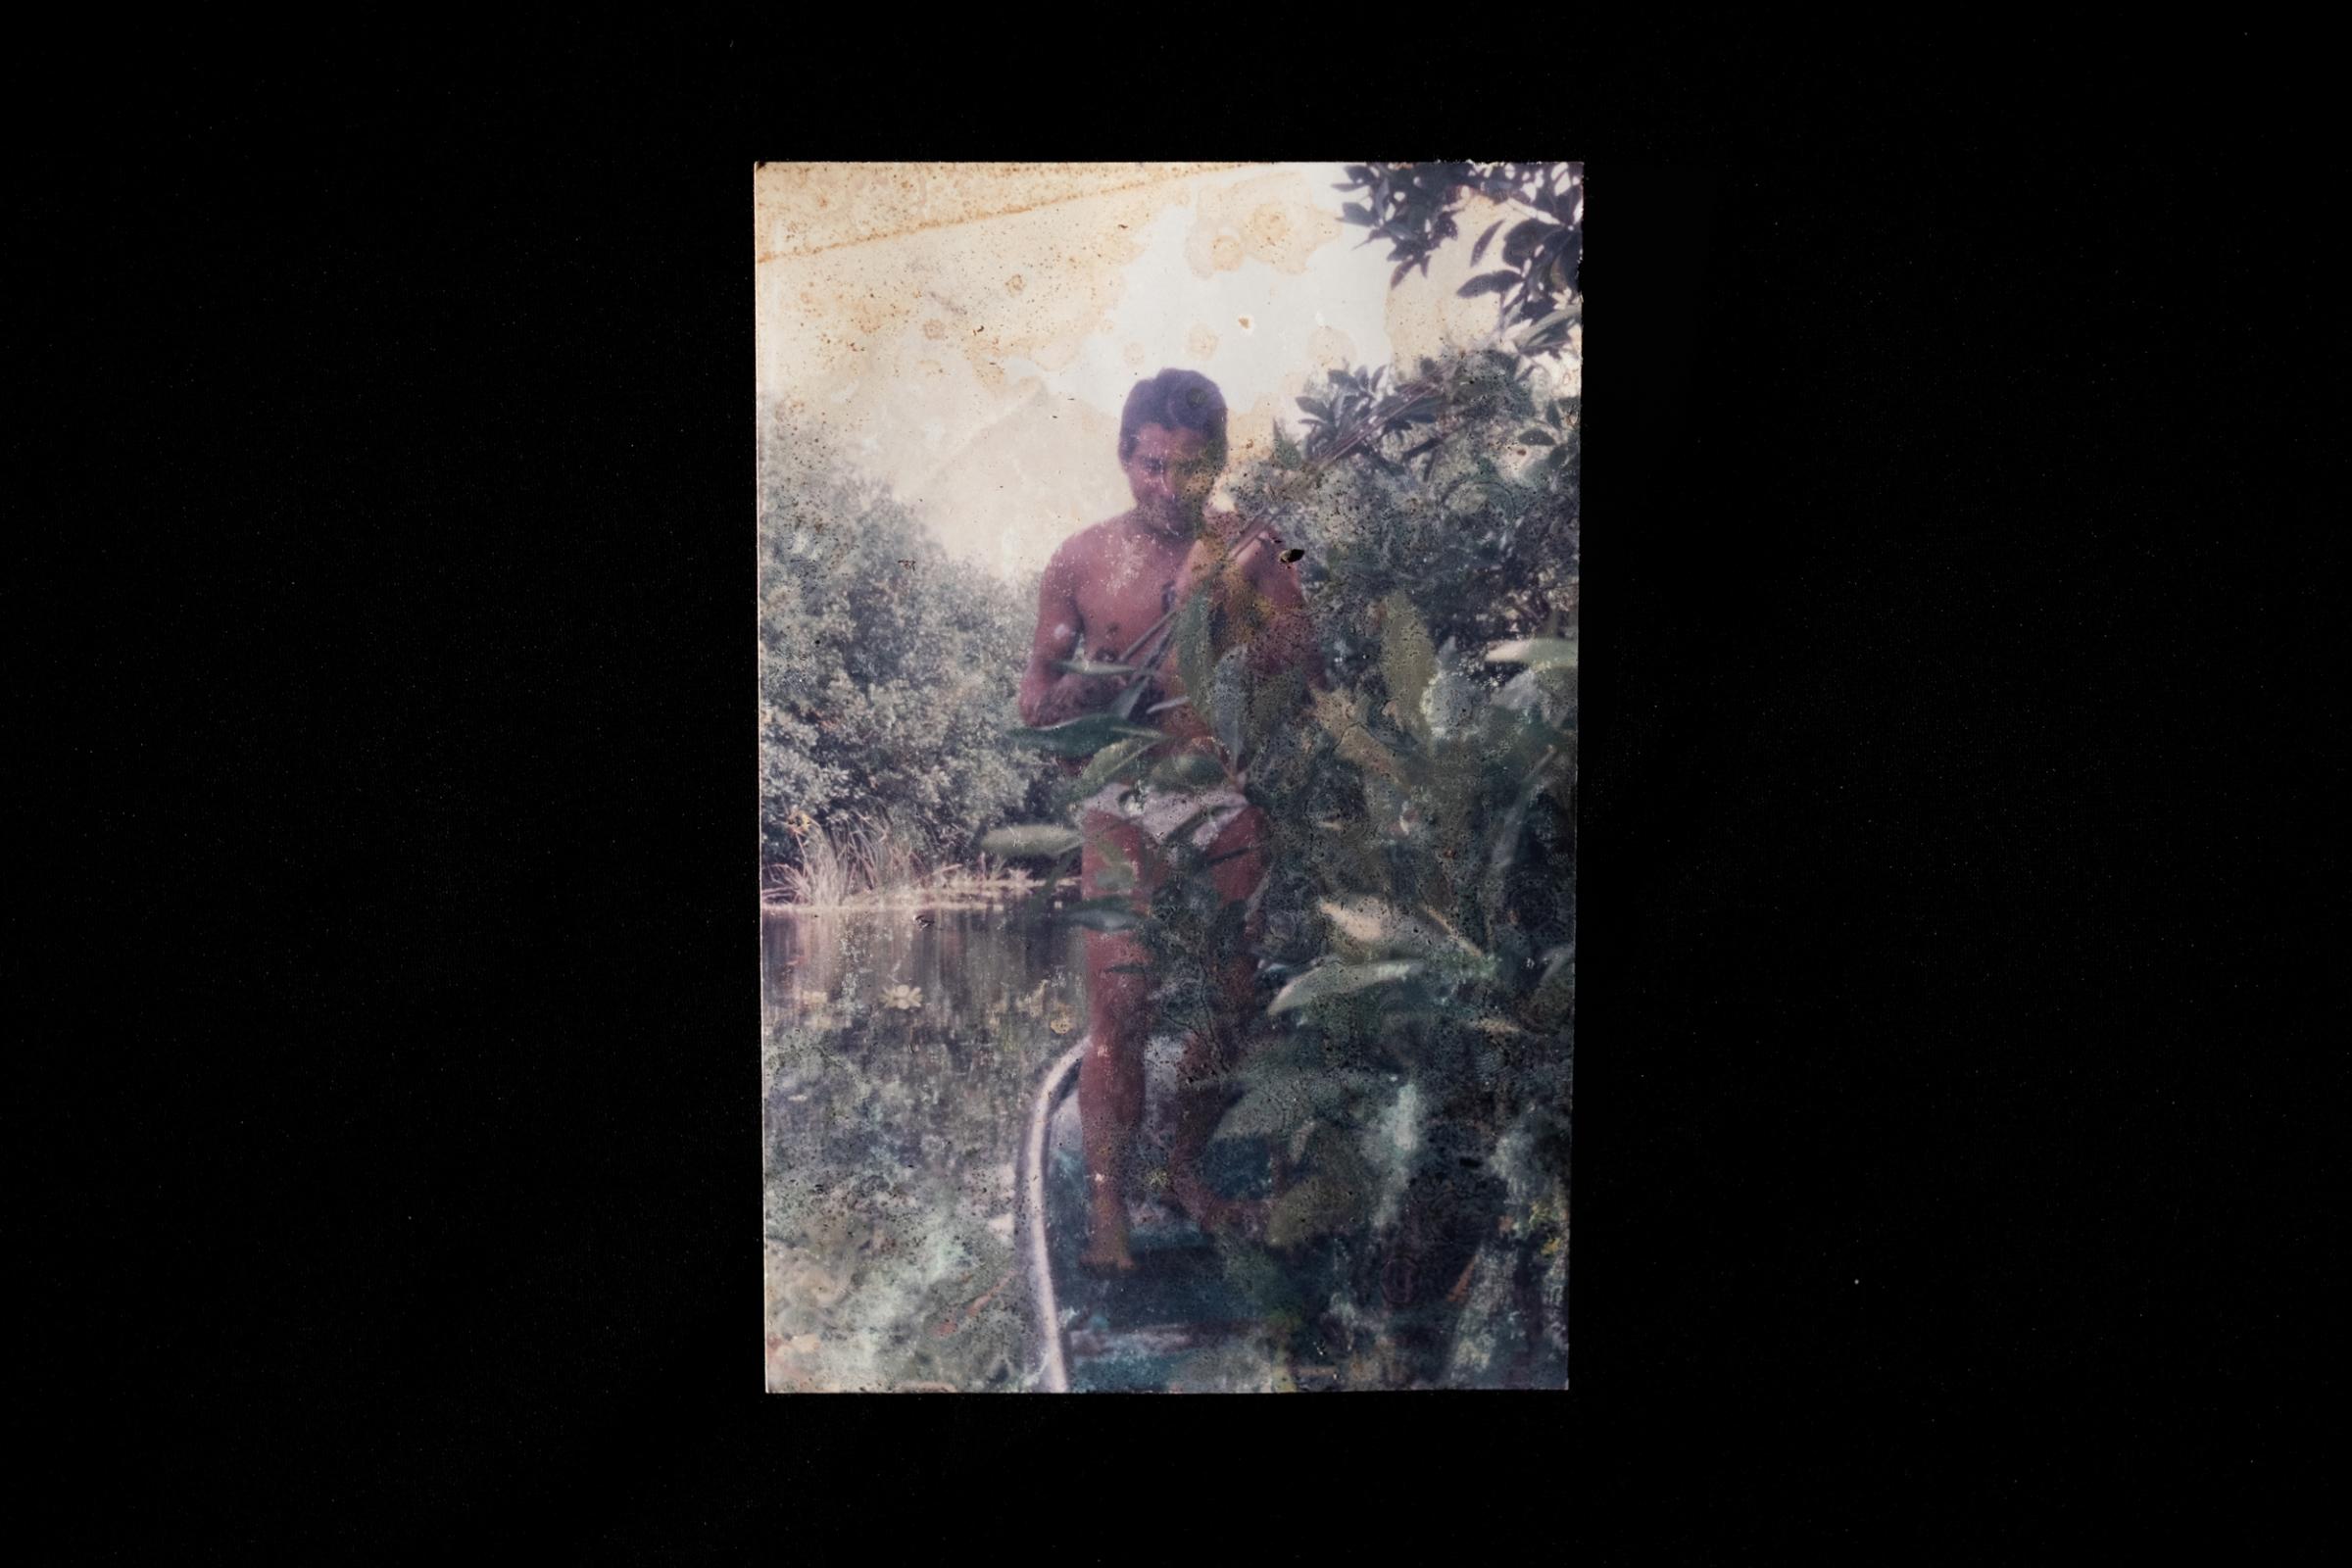 La Ventanilla: A window to coexisting with Crocodiles  - A man stands next to the mangrove forest in La Ventanilla.  From the communities archive, unknown...